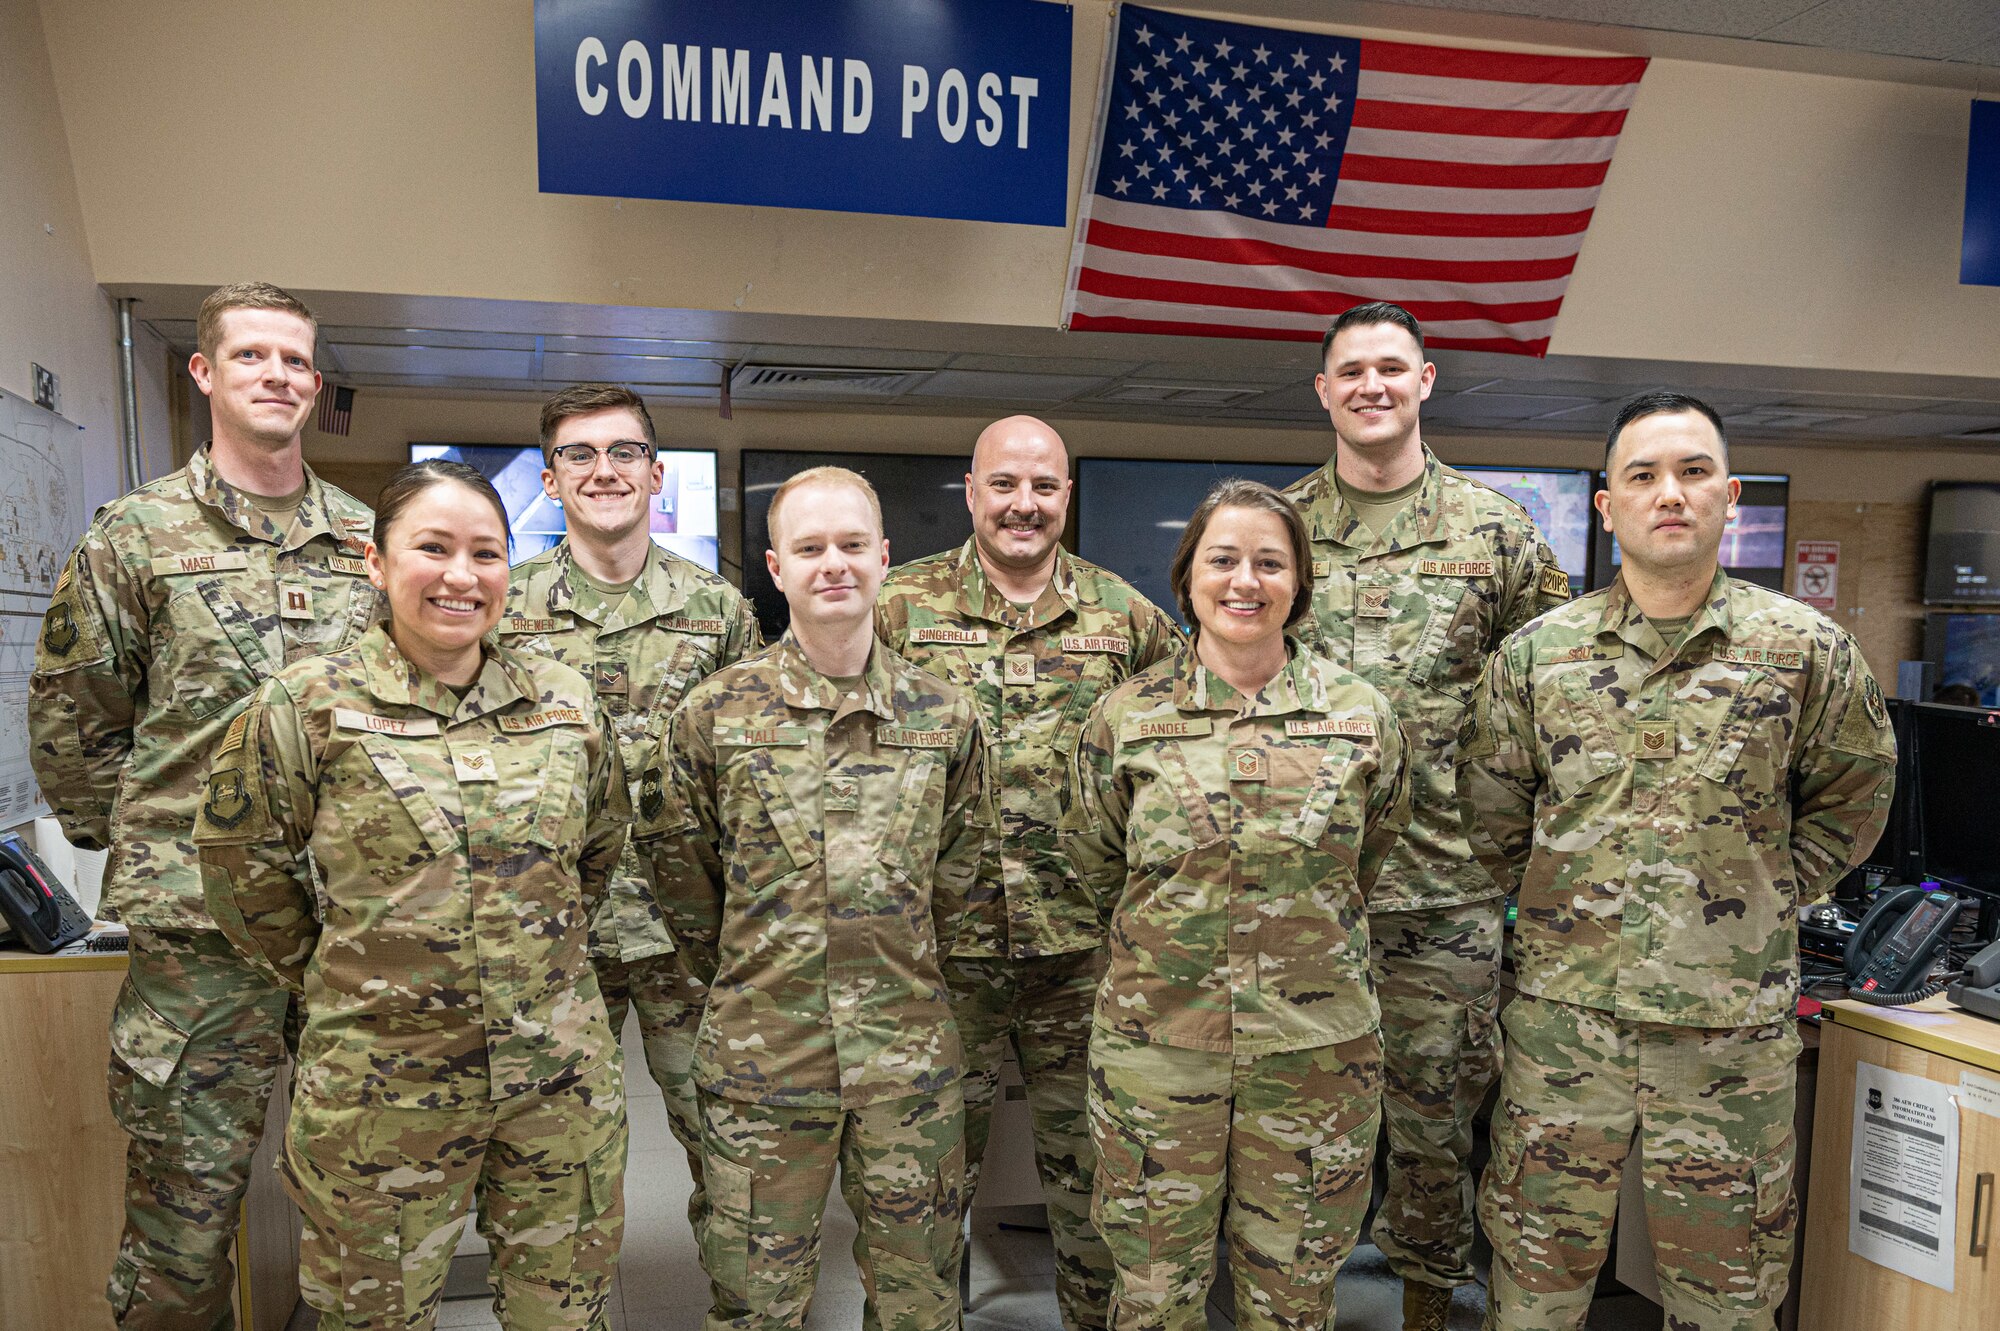 The base command and control operations center is the central command point for mission operations. It's the job of Airmen within to ensure operations and communications run efficiently and effectively.